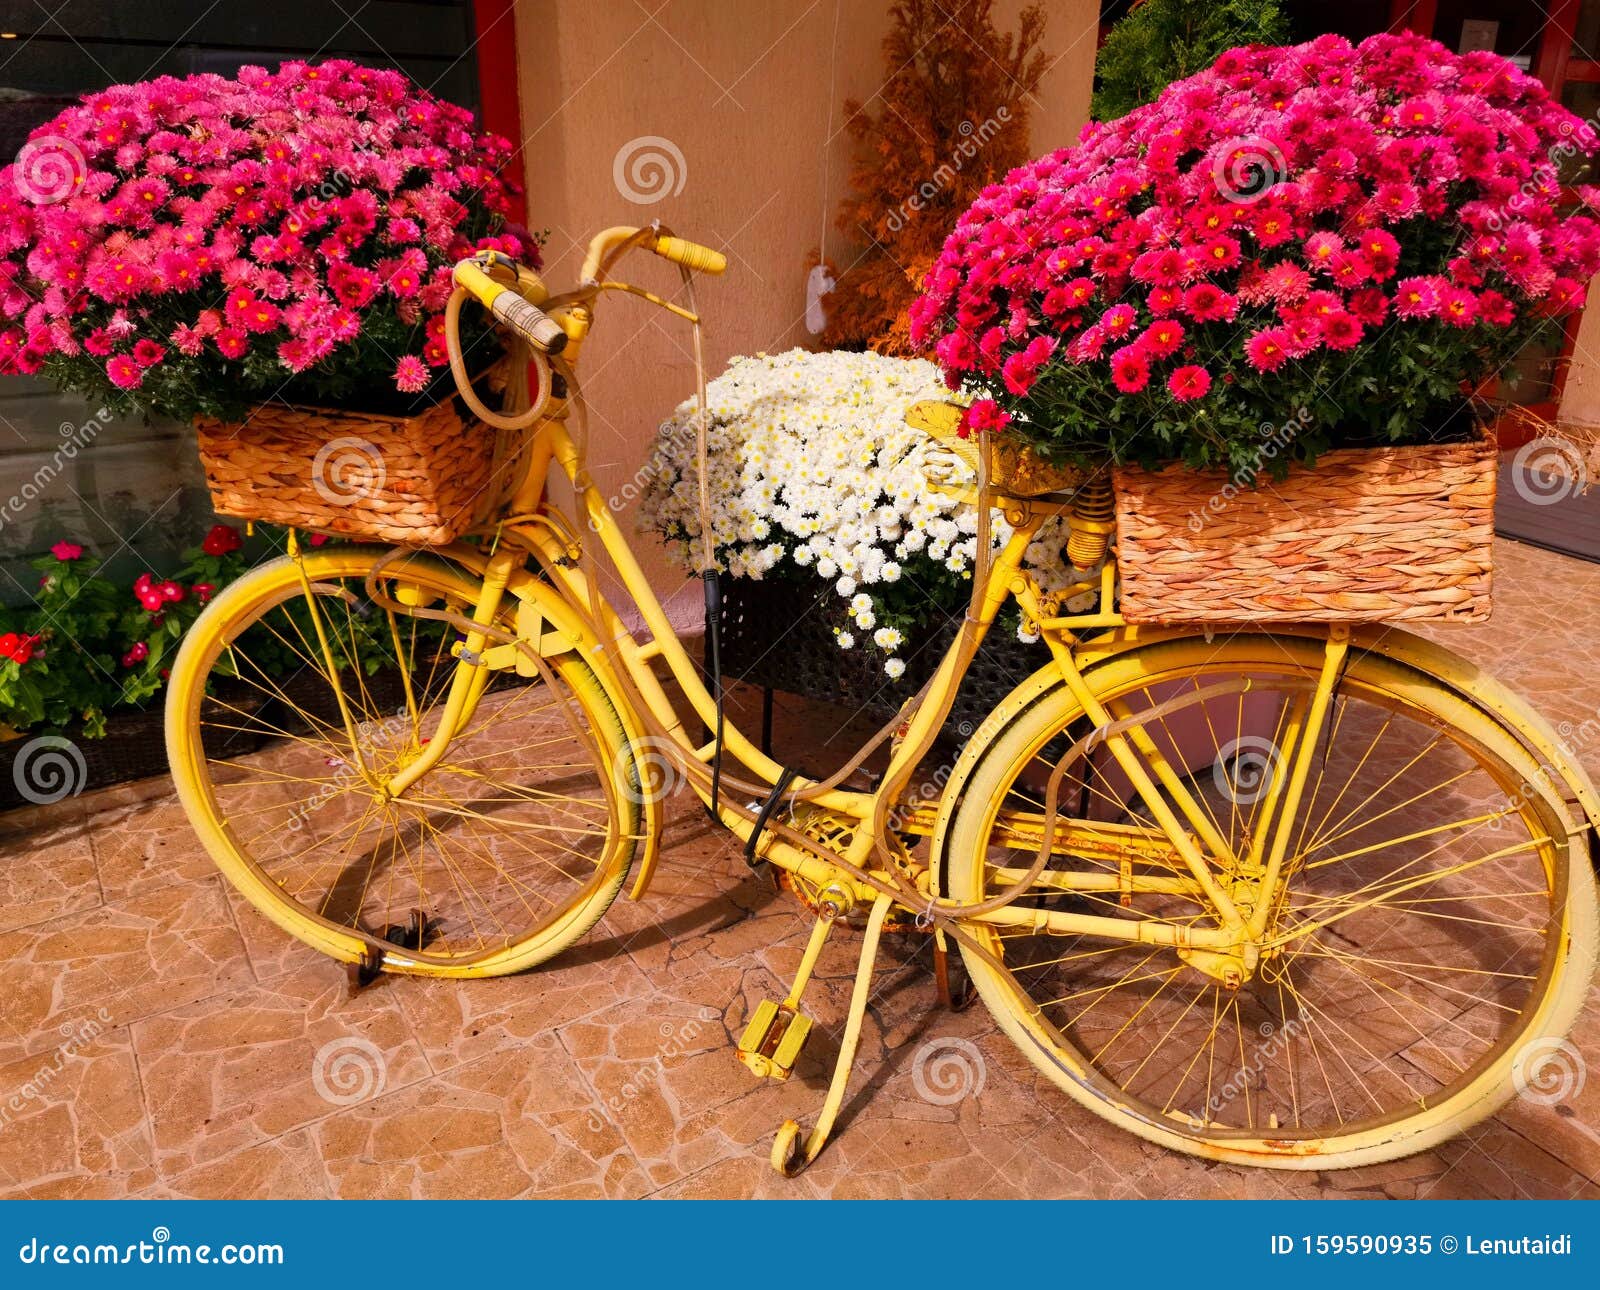 Details about   Italy Vintage Miniature Bicycle with Flower Basket Made of 80% Silver 